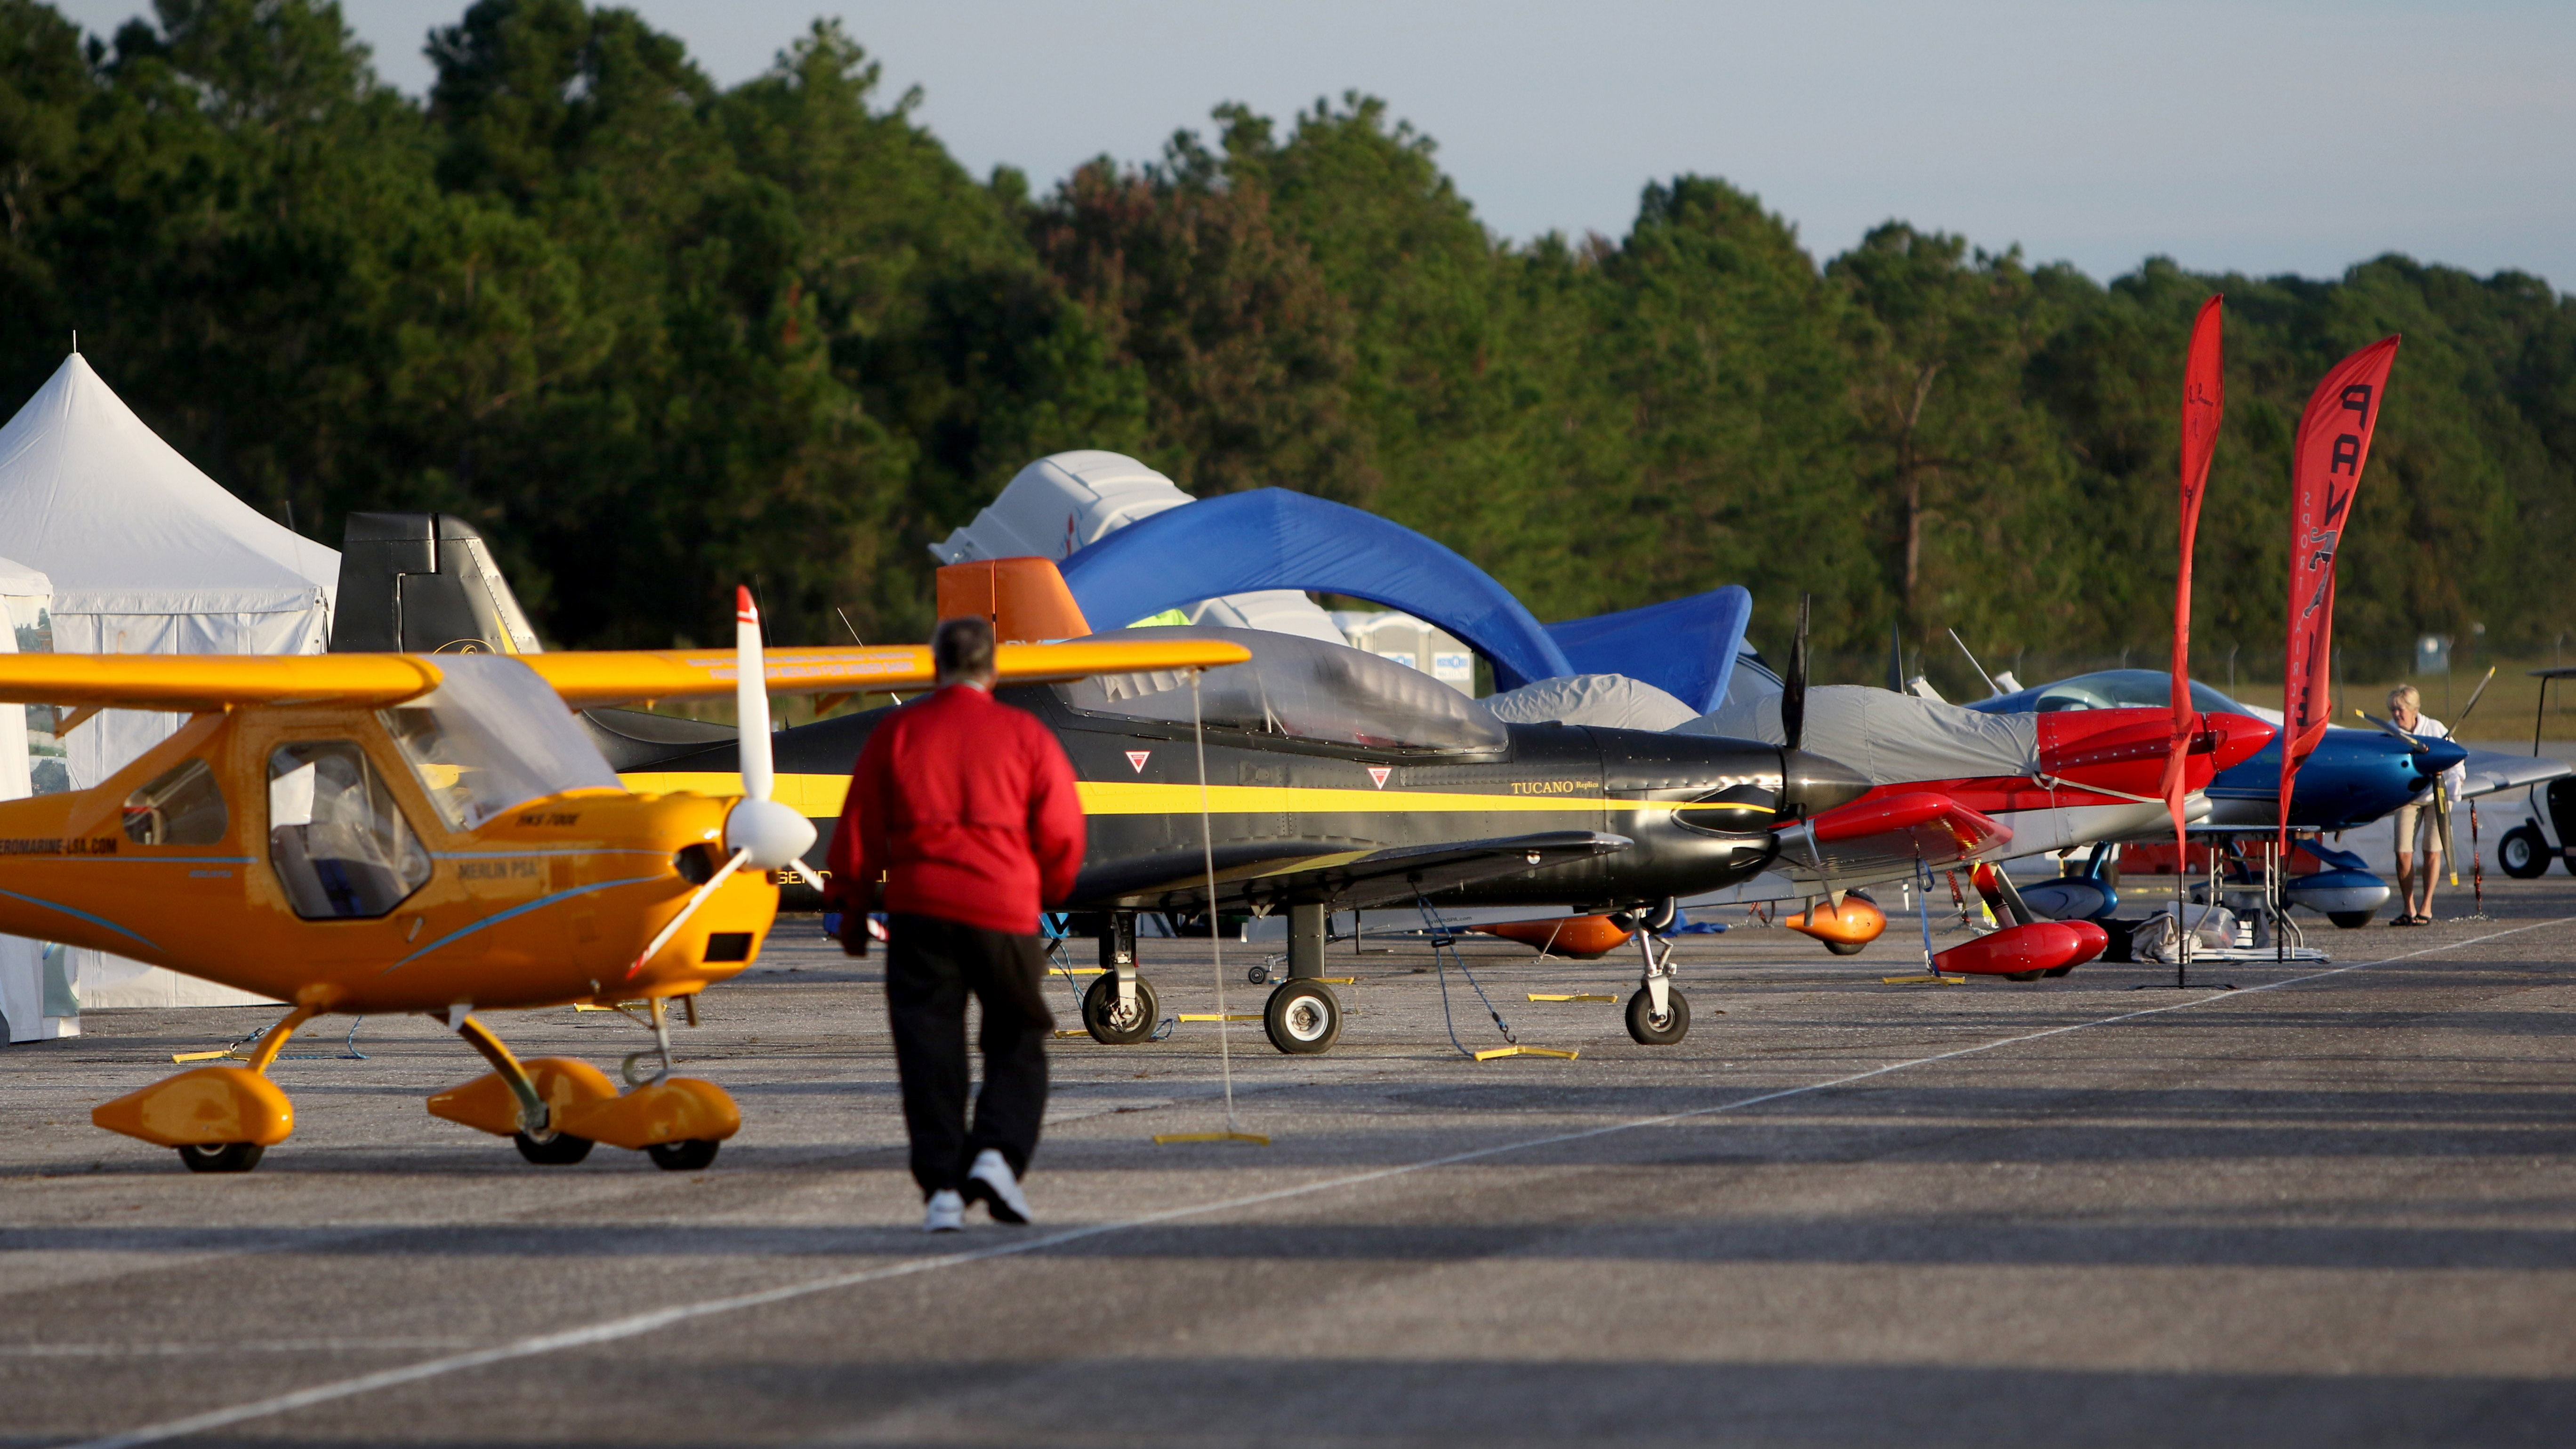 Oneday flyin, drivein to replace Sport Aviation Showcase in January AOPA